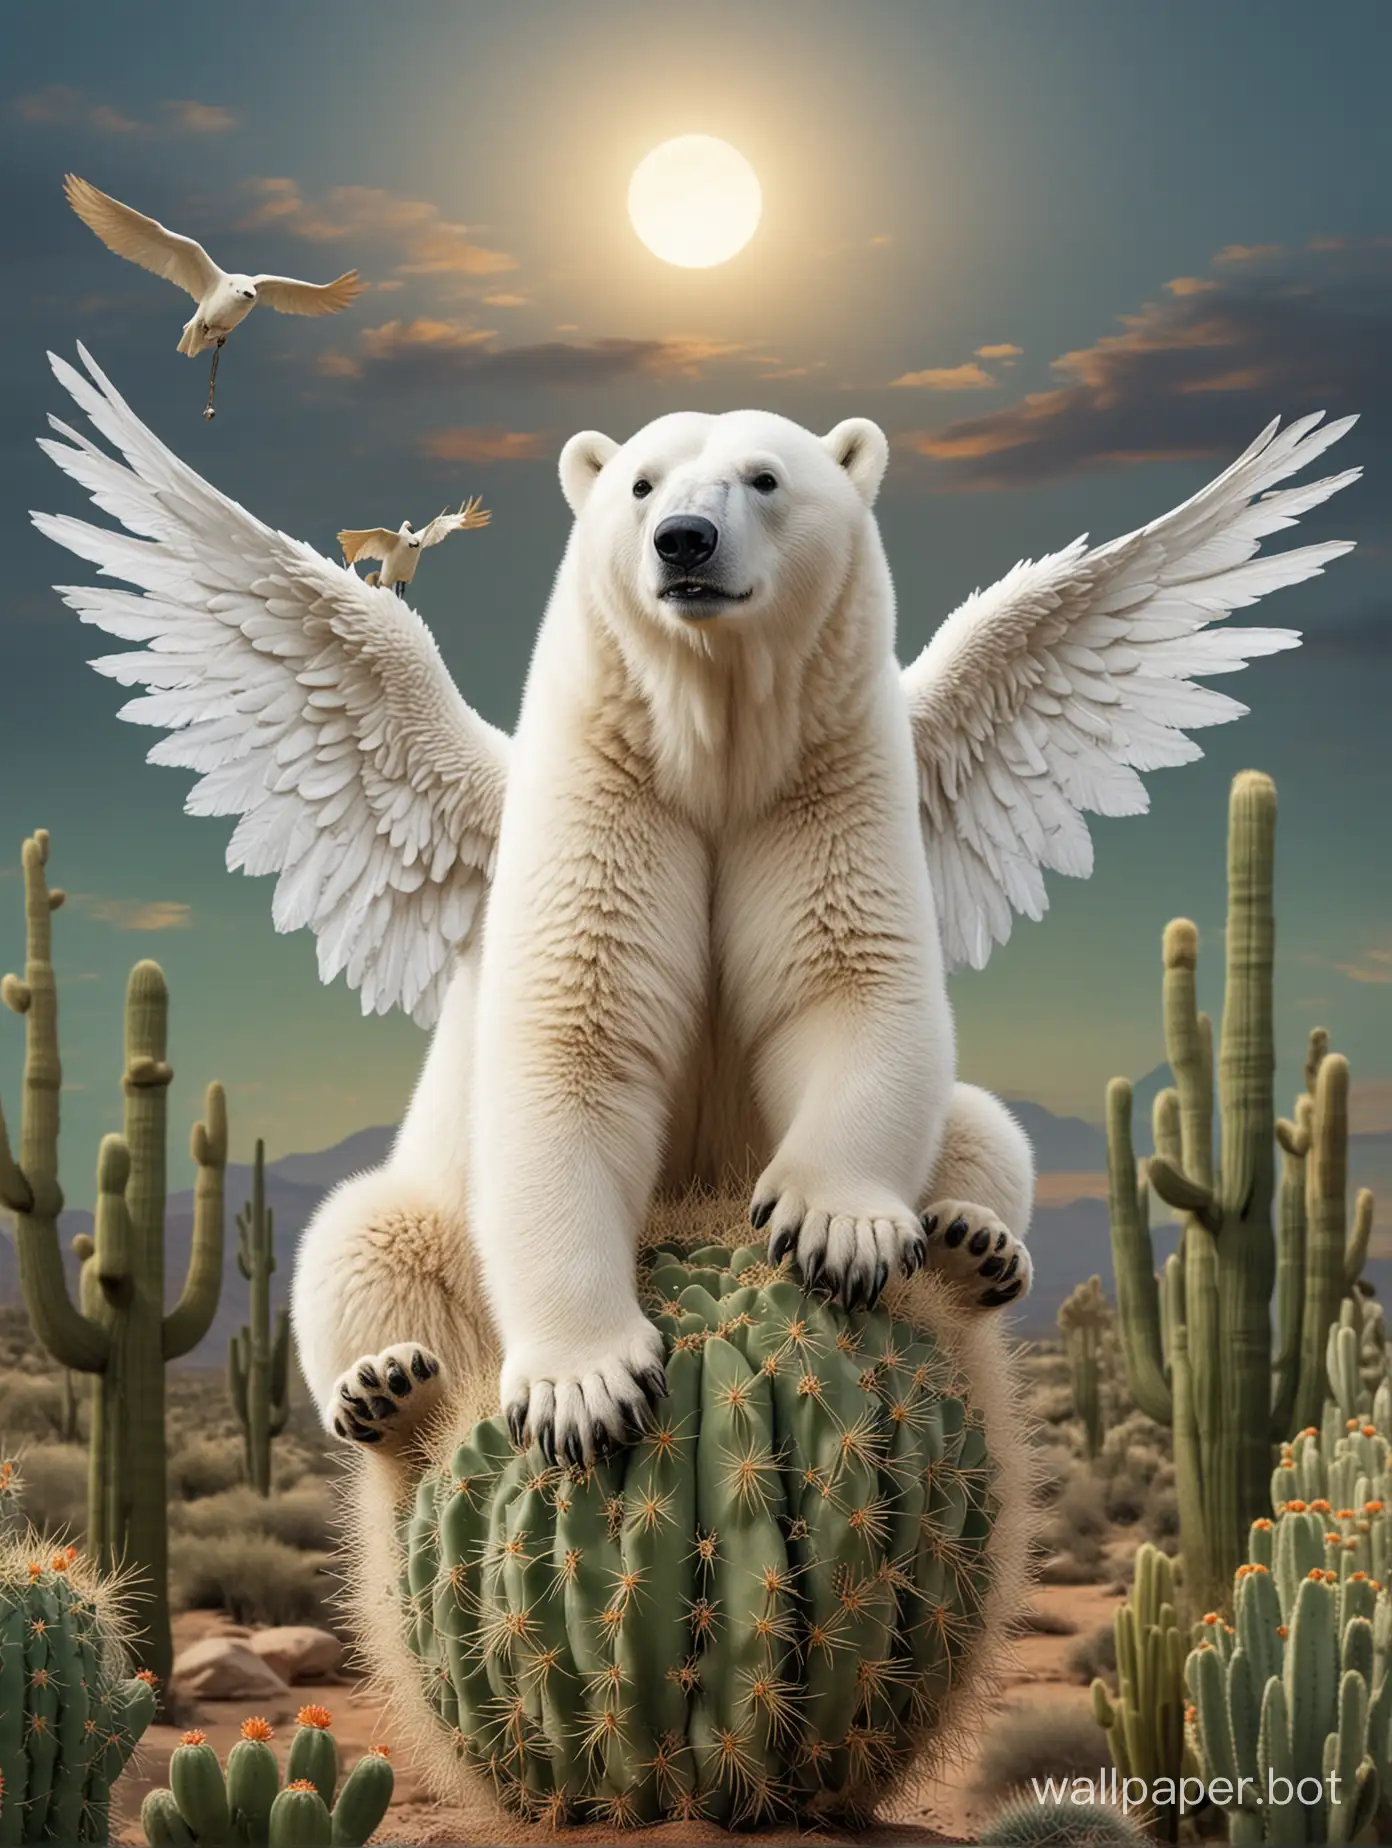 Majestic-Polar-Bear-Perched-on-a-Cactus-with-Ethereal-Wings